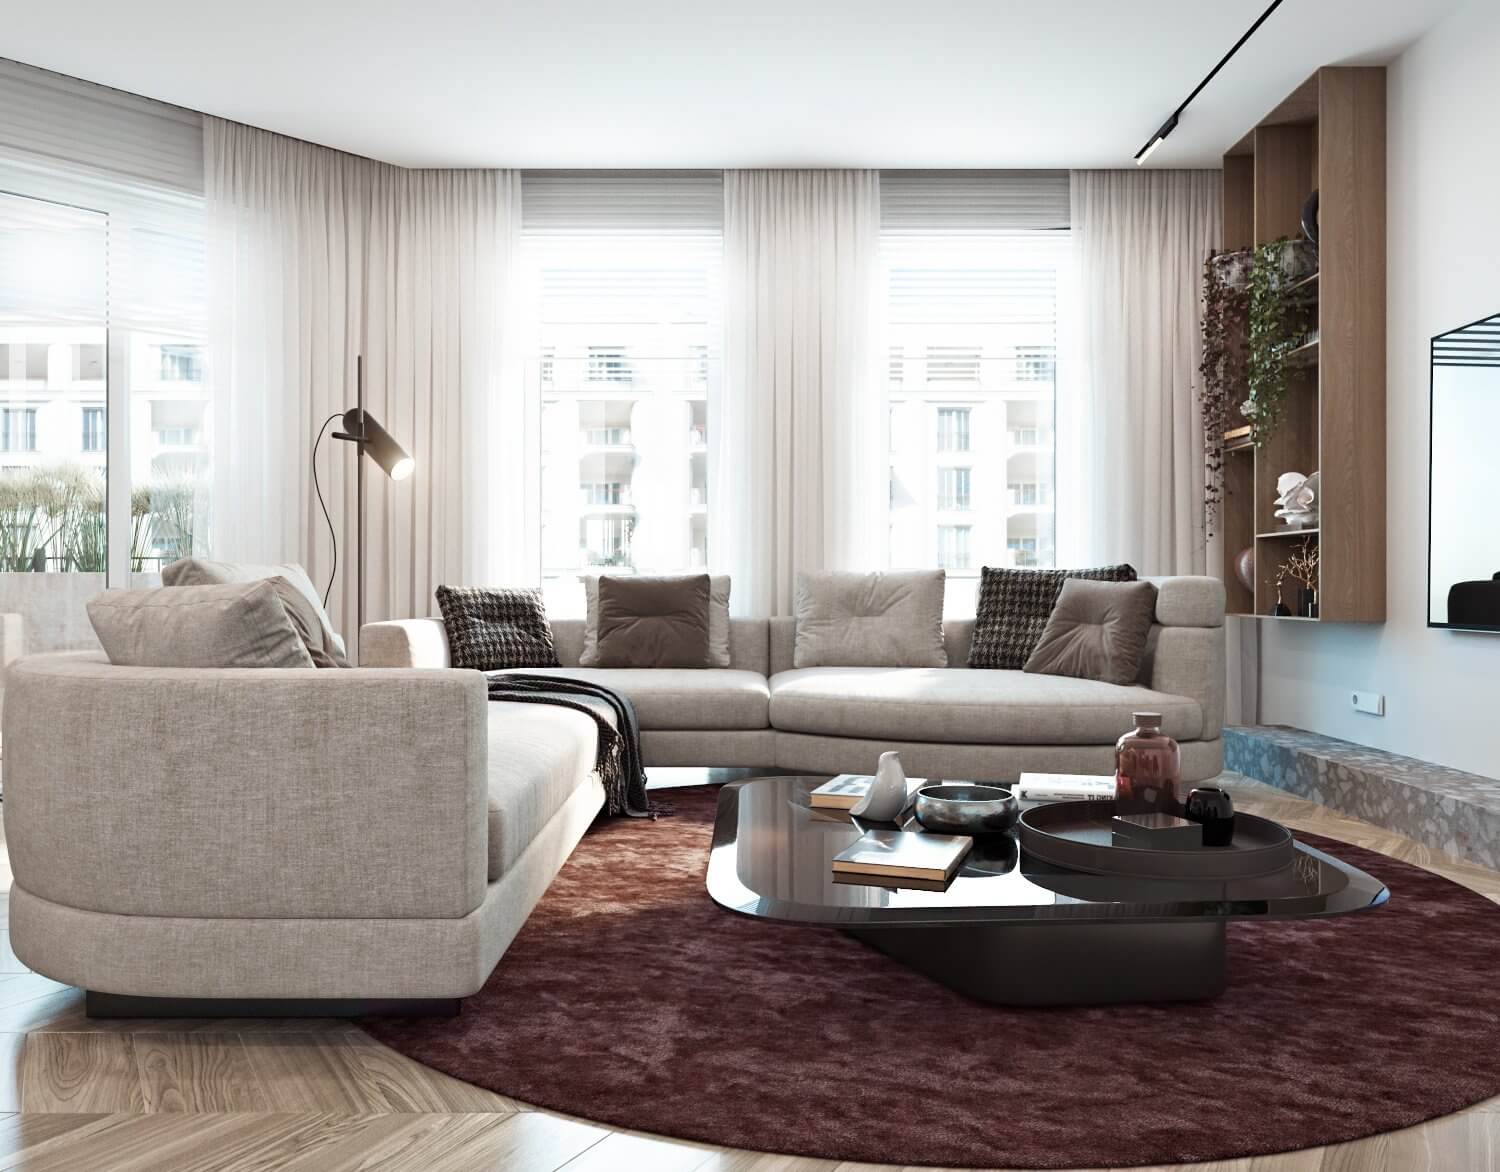 Apartment for a young family living room sofa - cgi visualization